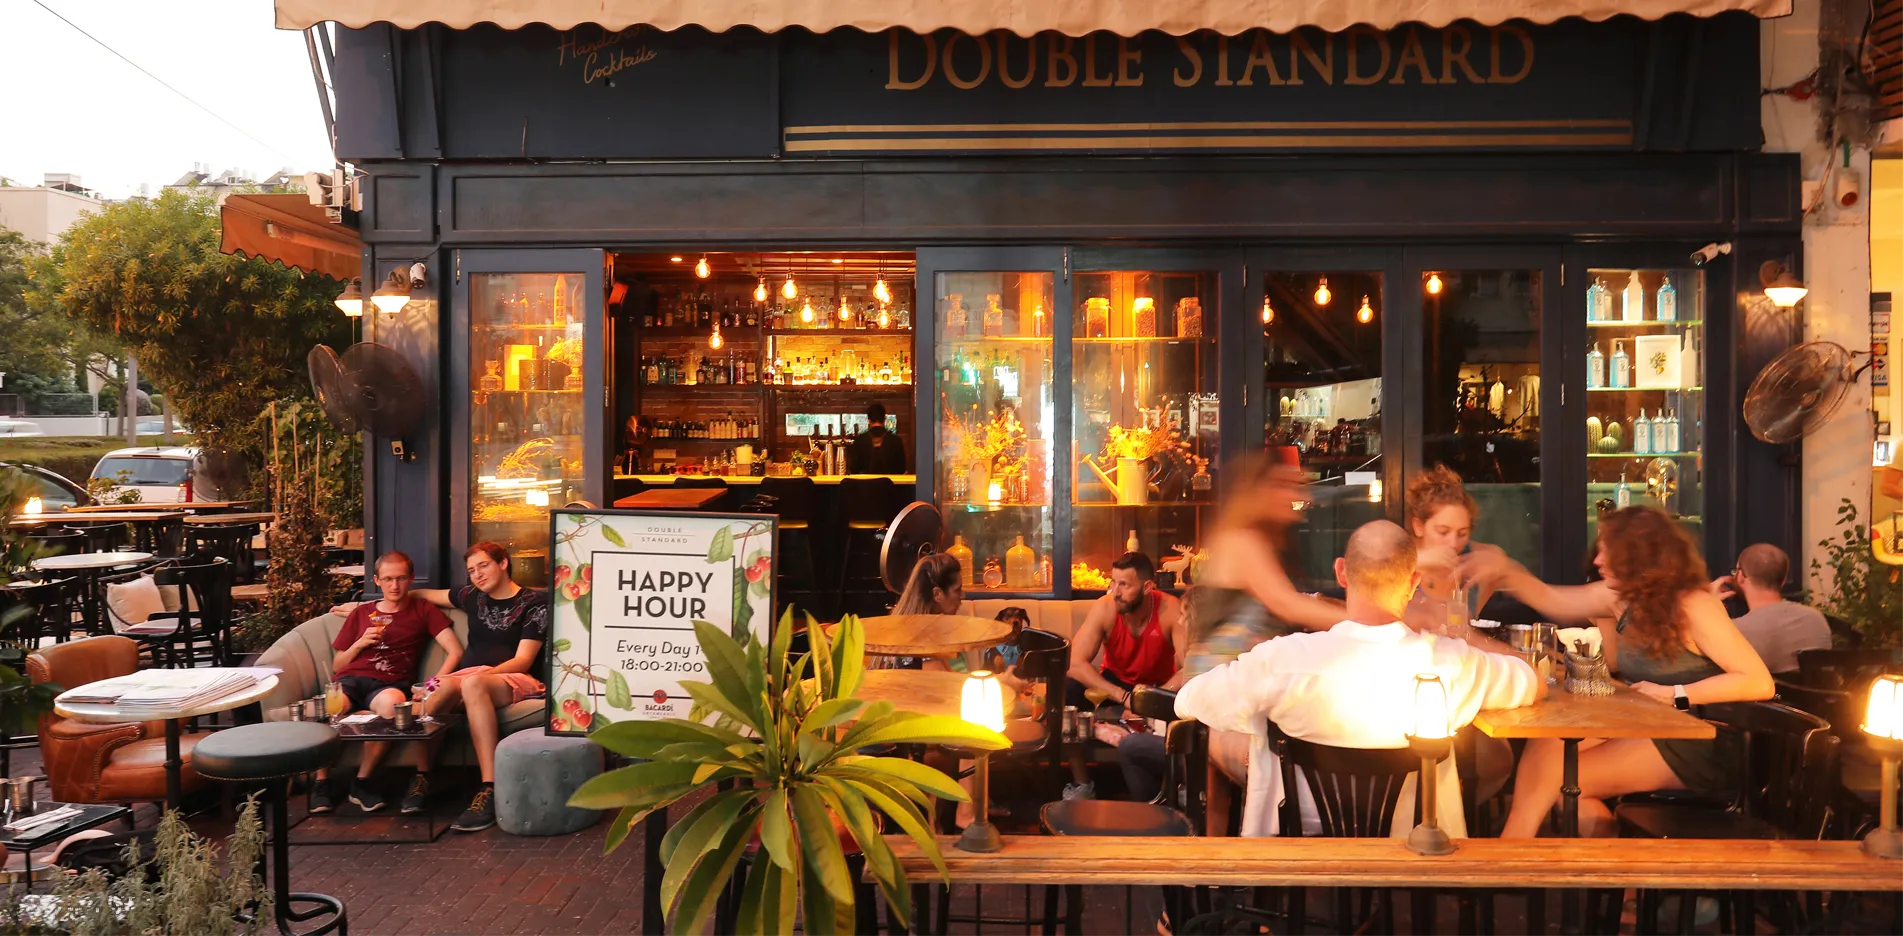 Double Standard in Israel, Middle East | Bars - Rated 3.9